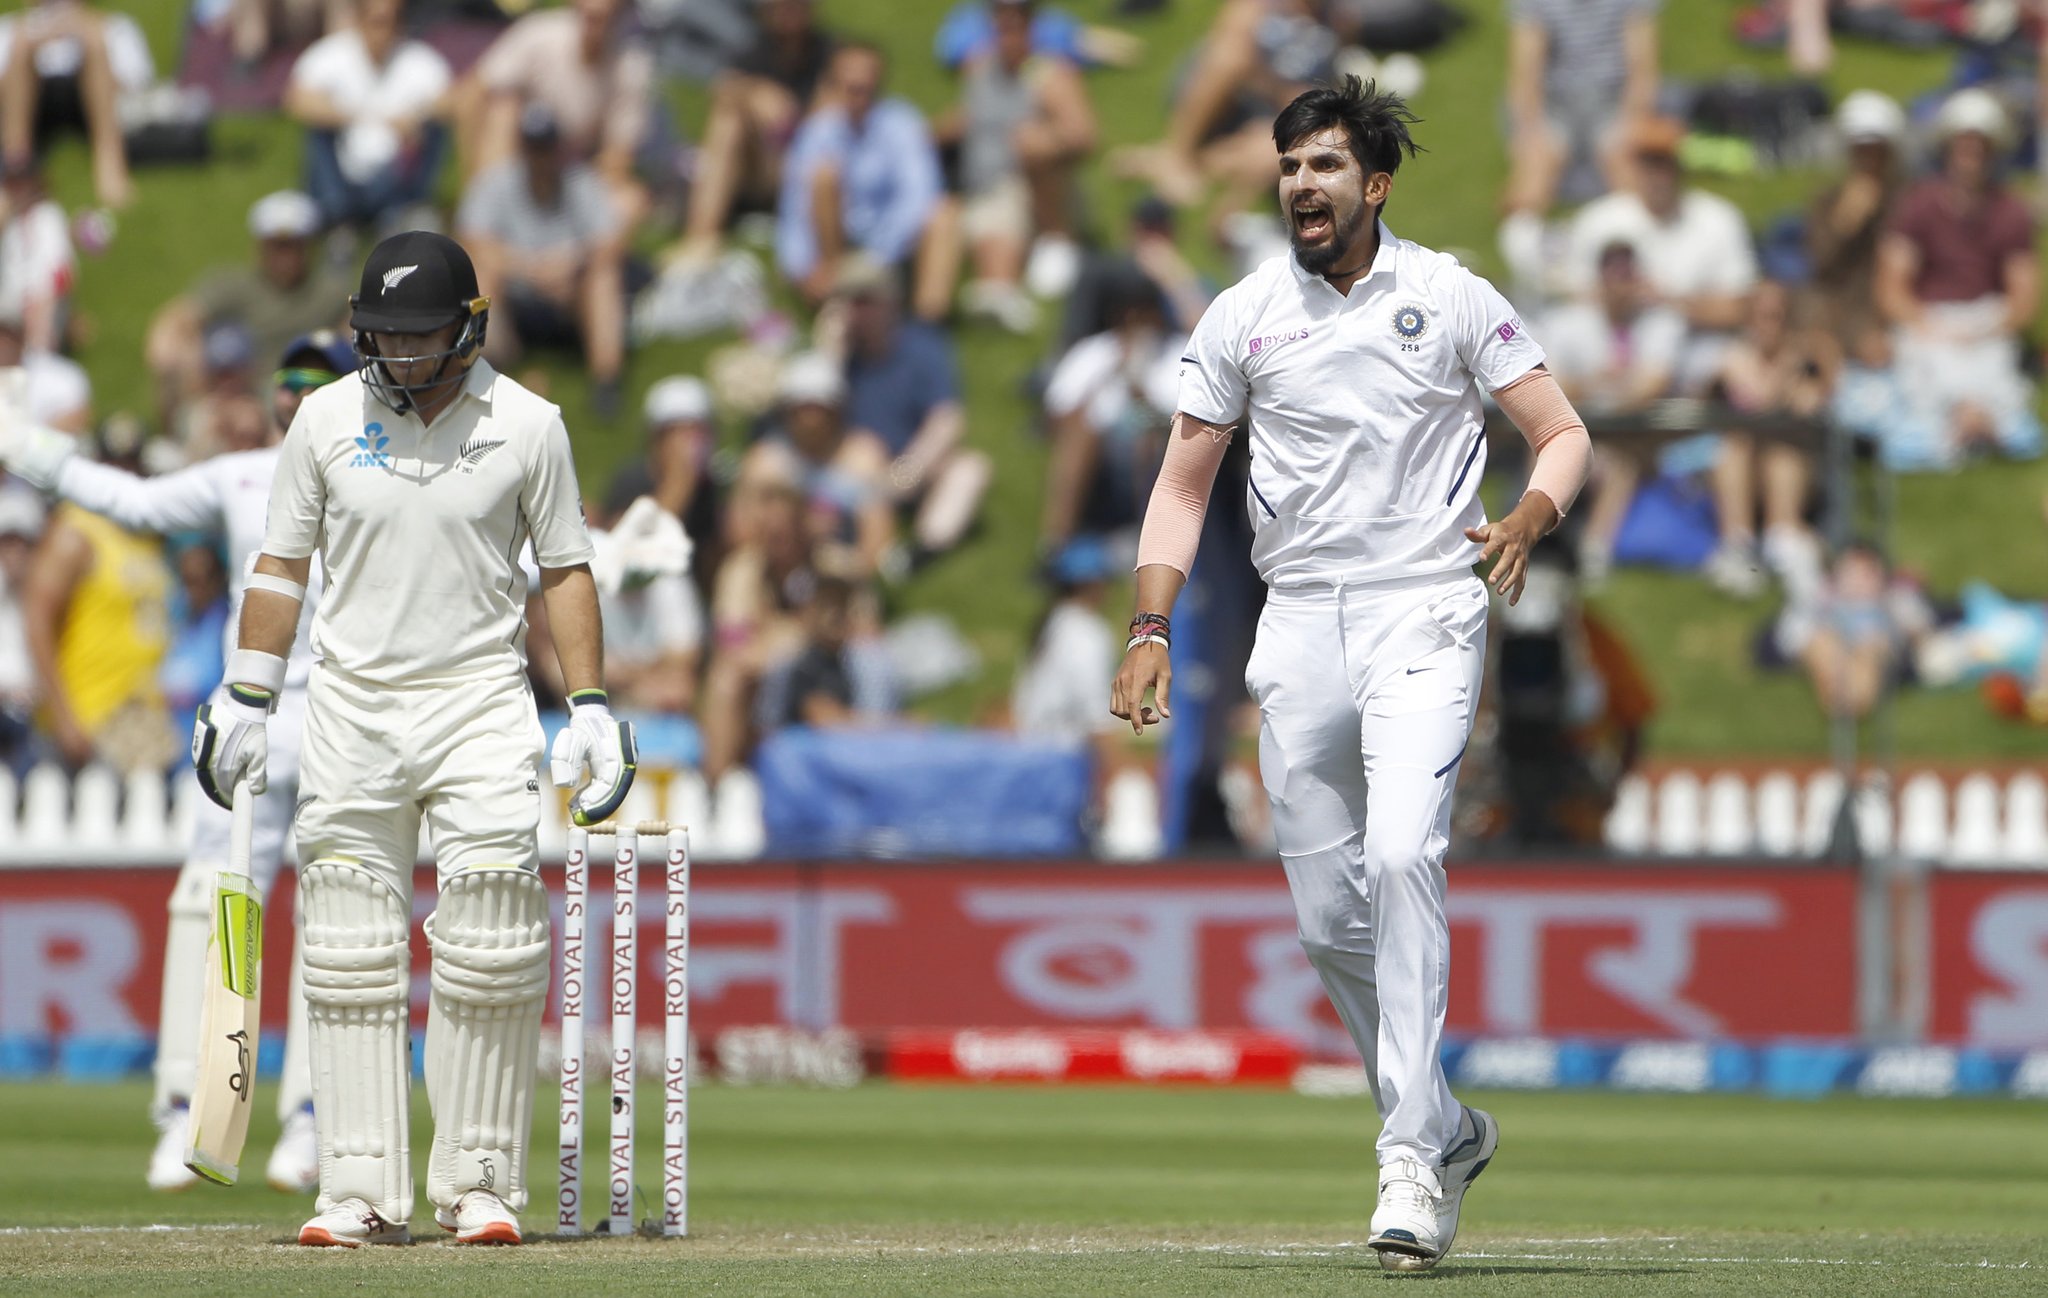 Ishant sizzles, Williamson dazzles on an intriguing second day